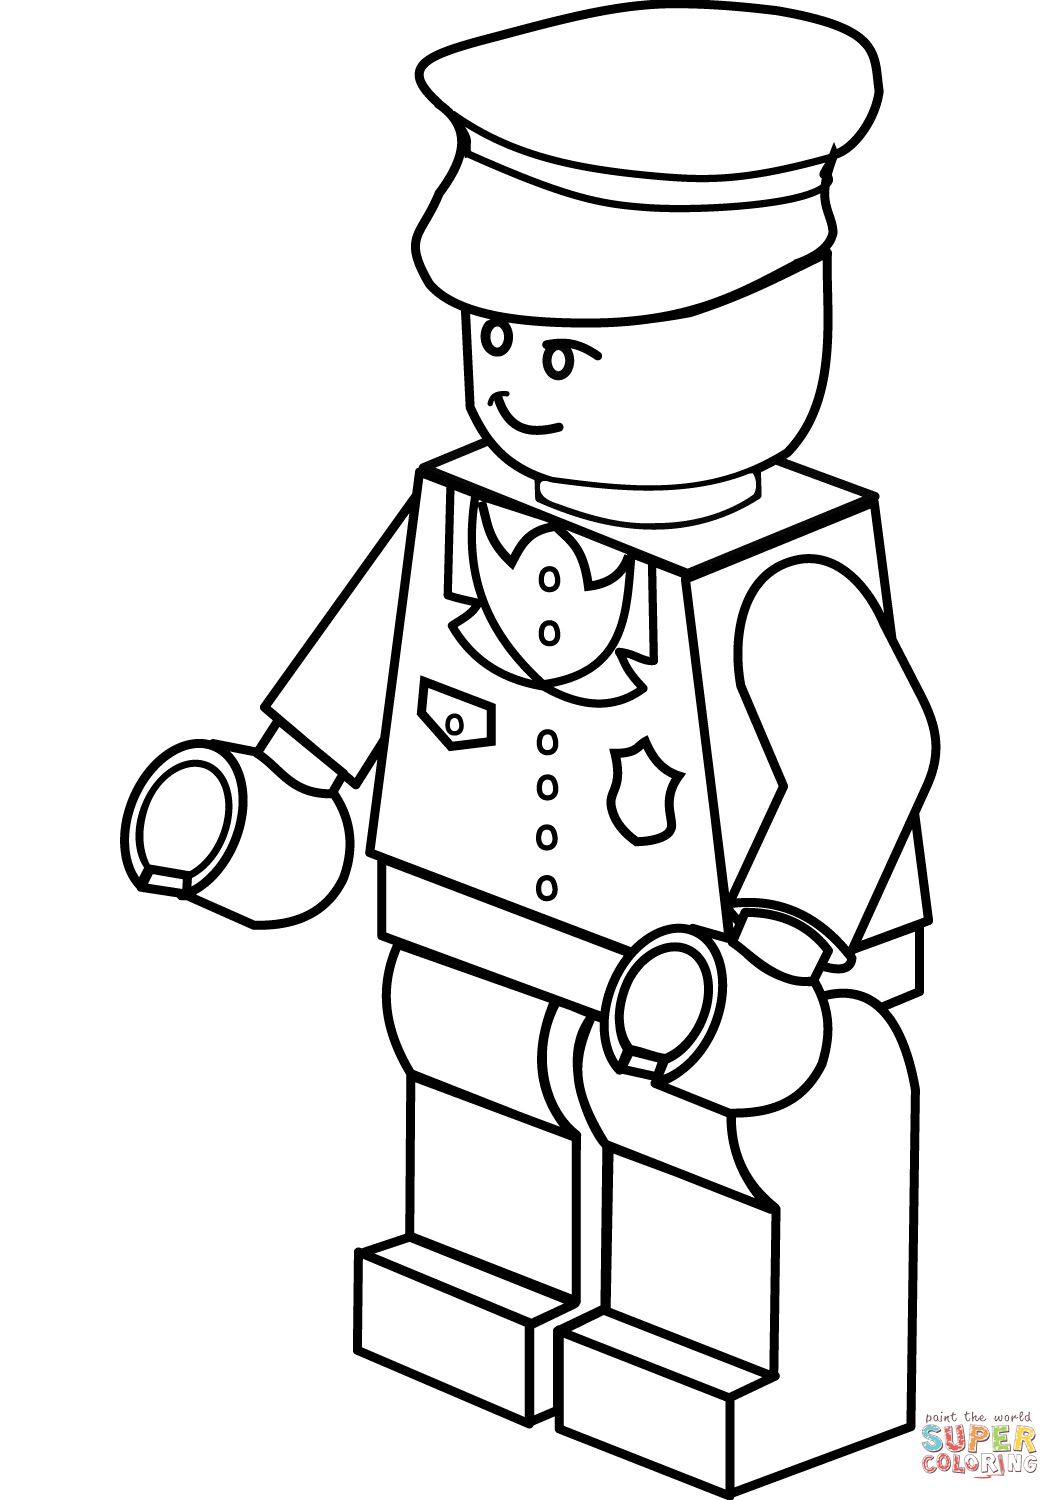 Swat Coloring Pages at GetColoringscom Free printable